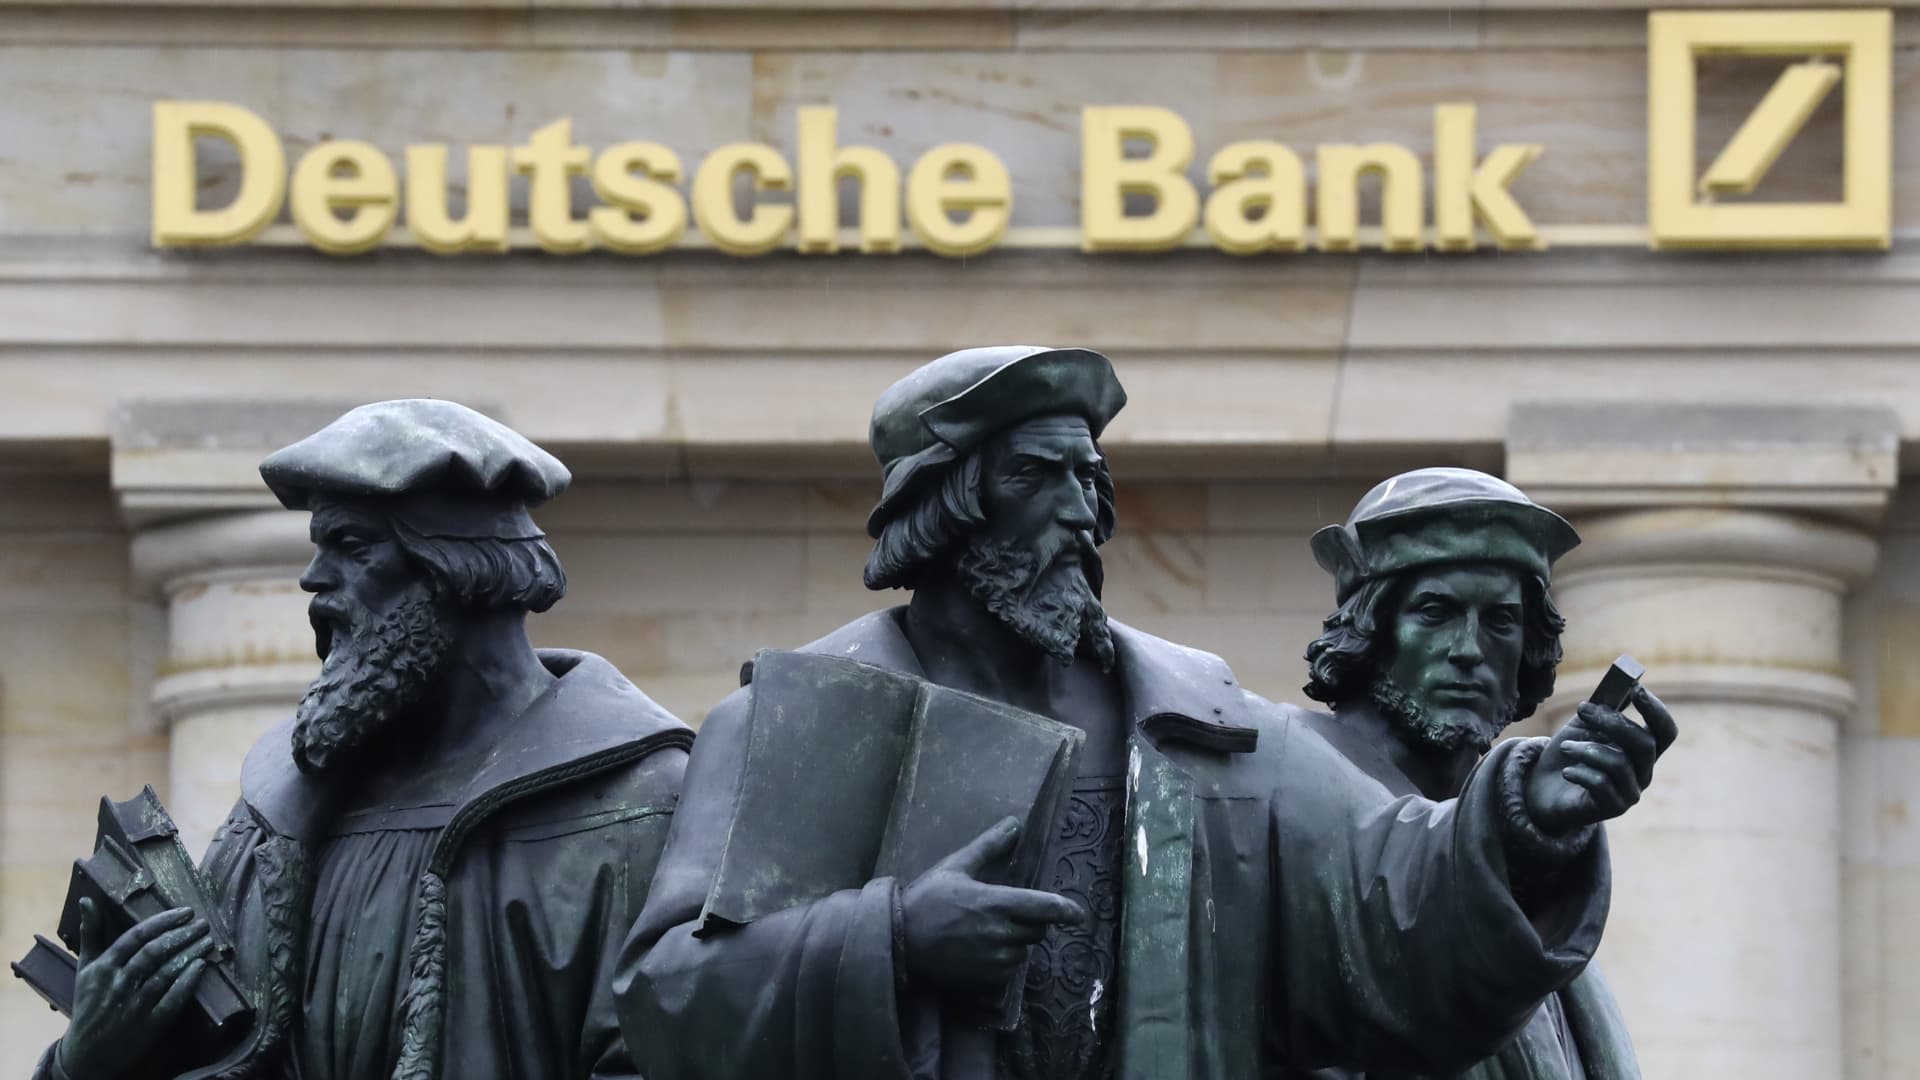 Deutsche Bank beats expectations to post eighth straight quarter of profit